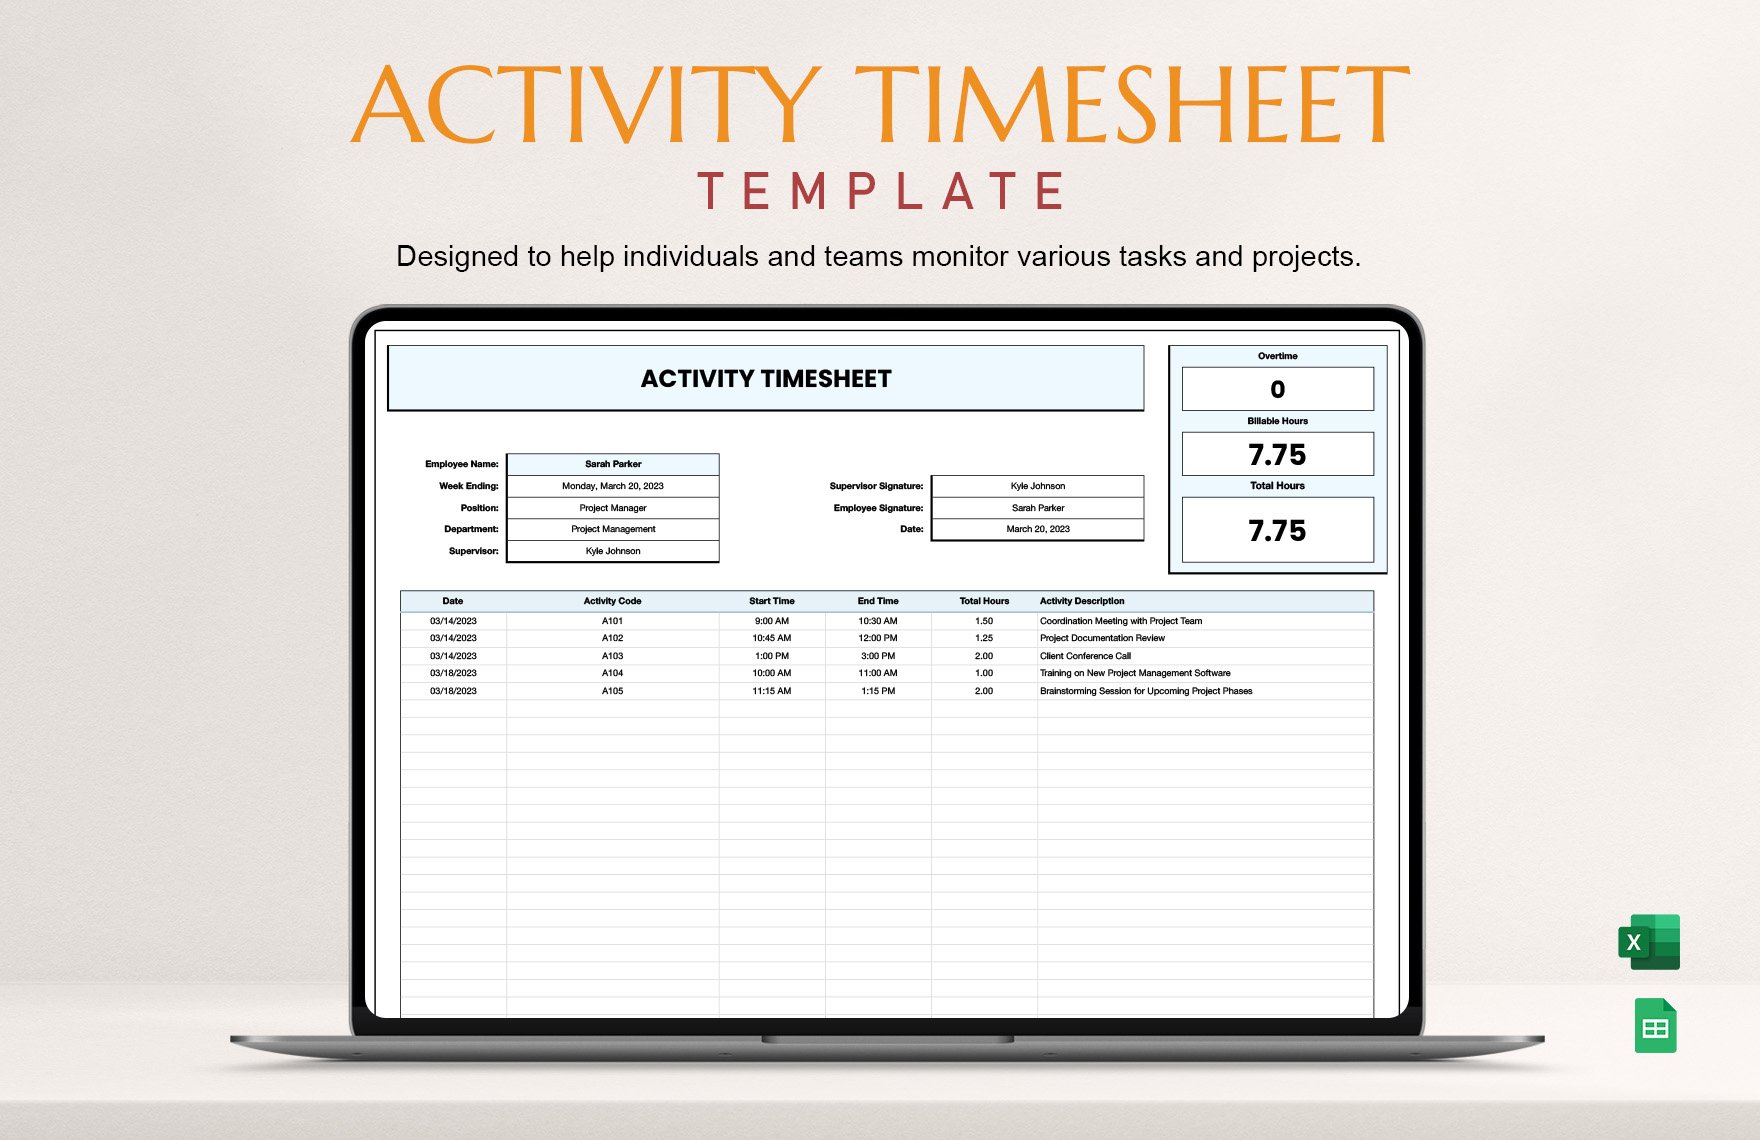 Free Activity Timesheet Template in Excel, Google Sheets